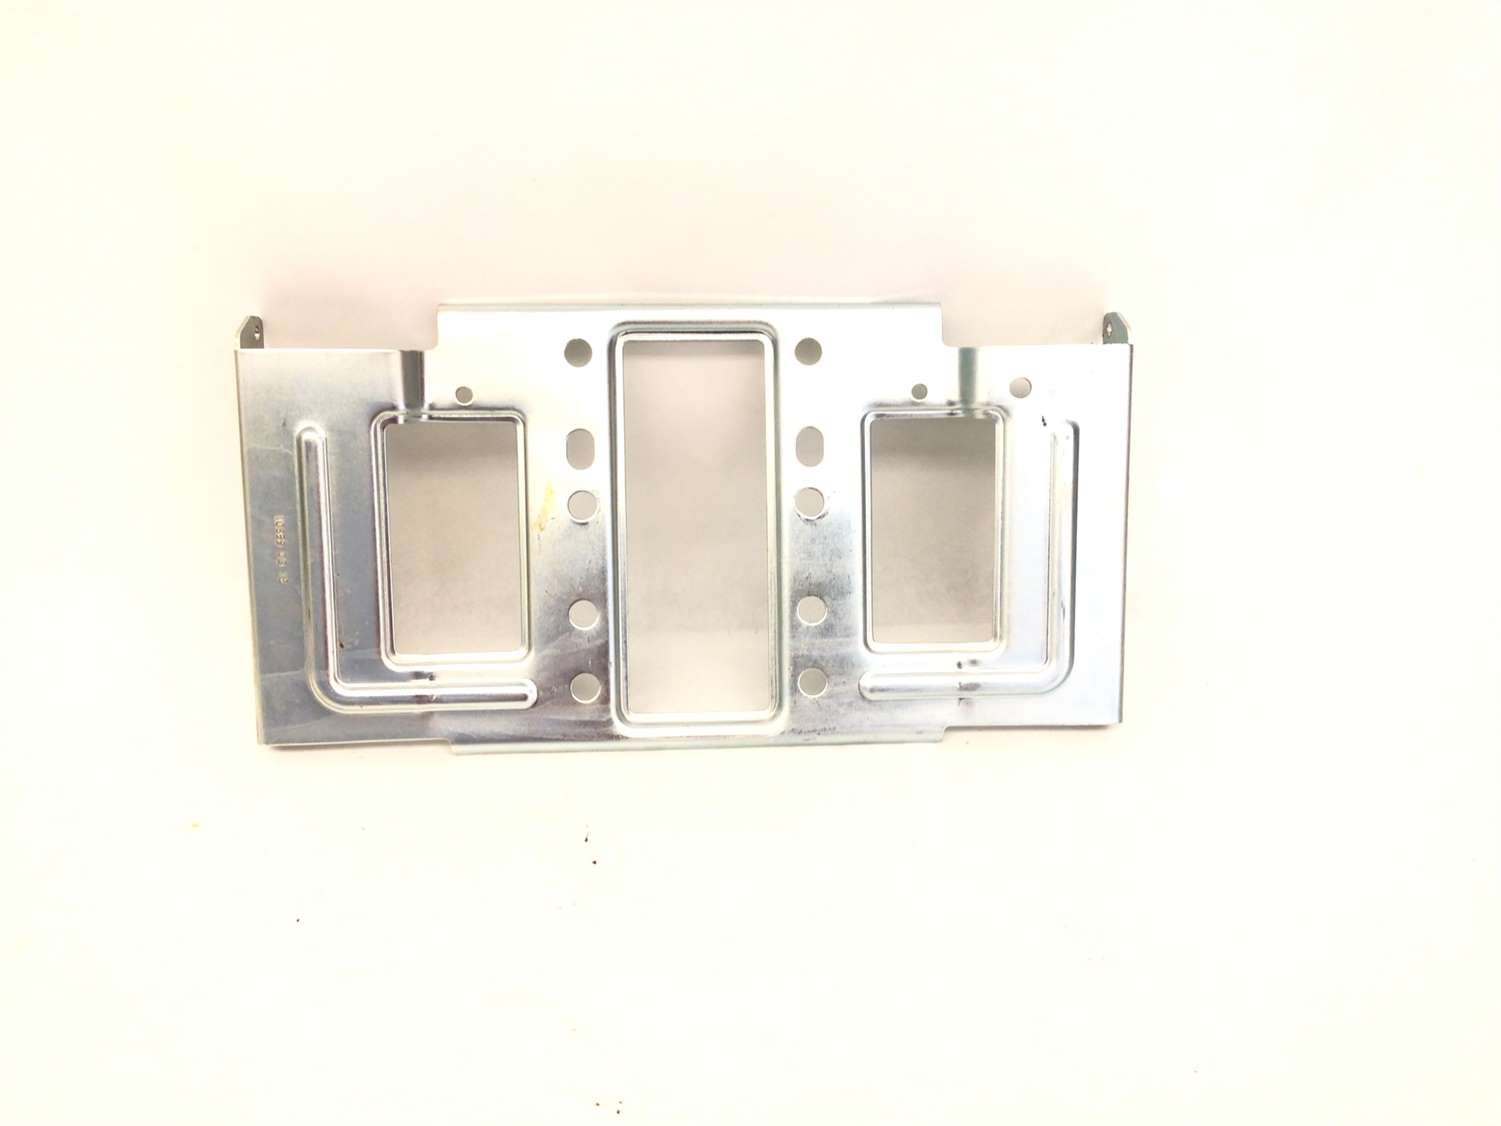 Support Plate (Used)